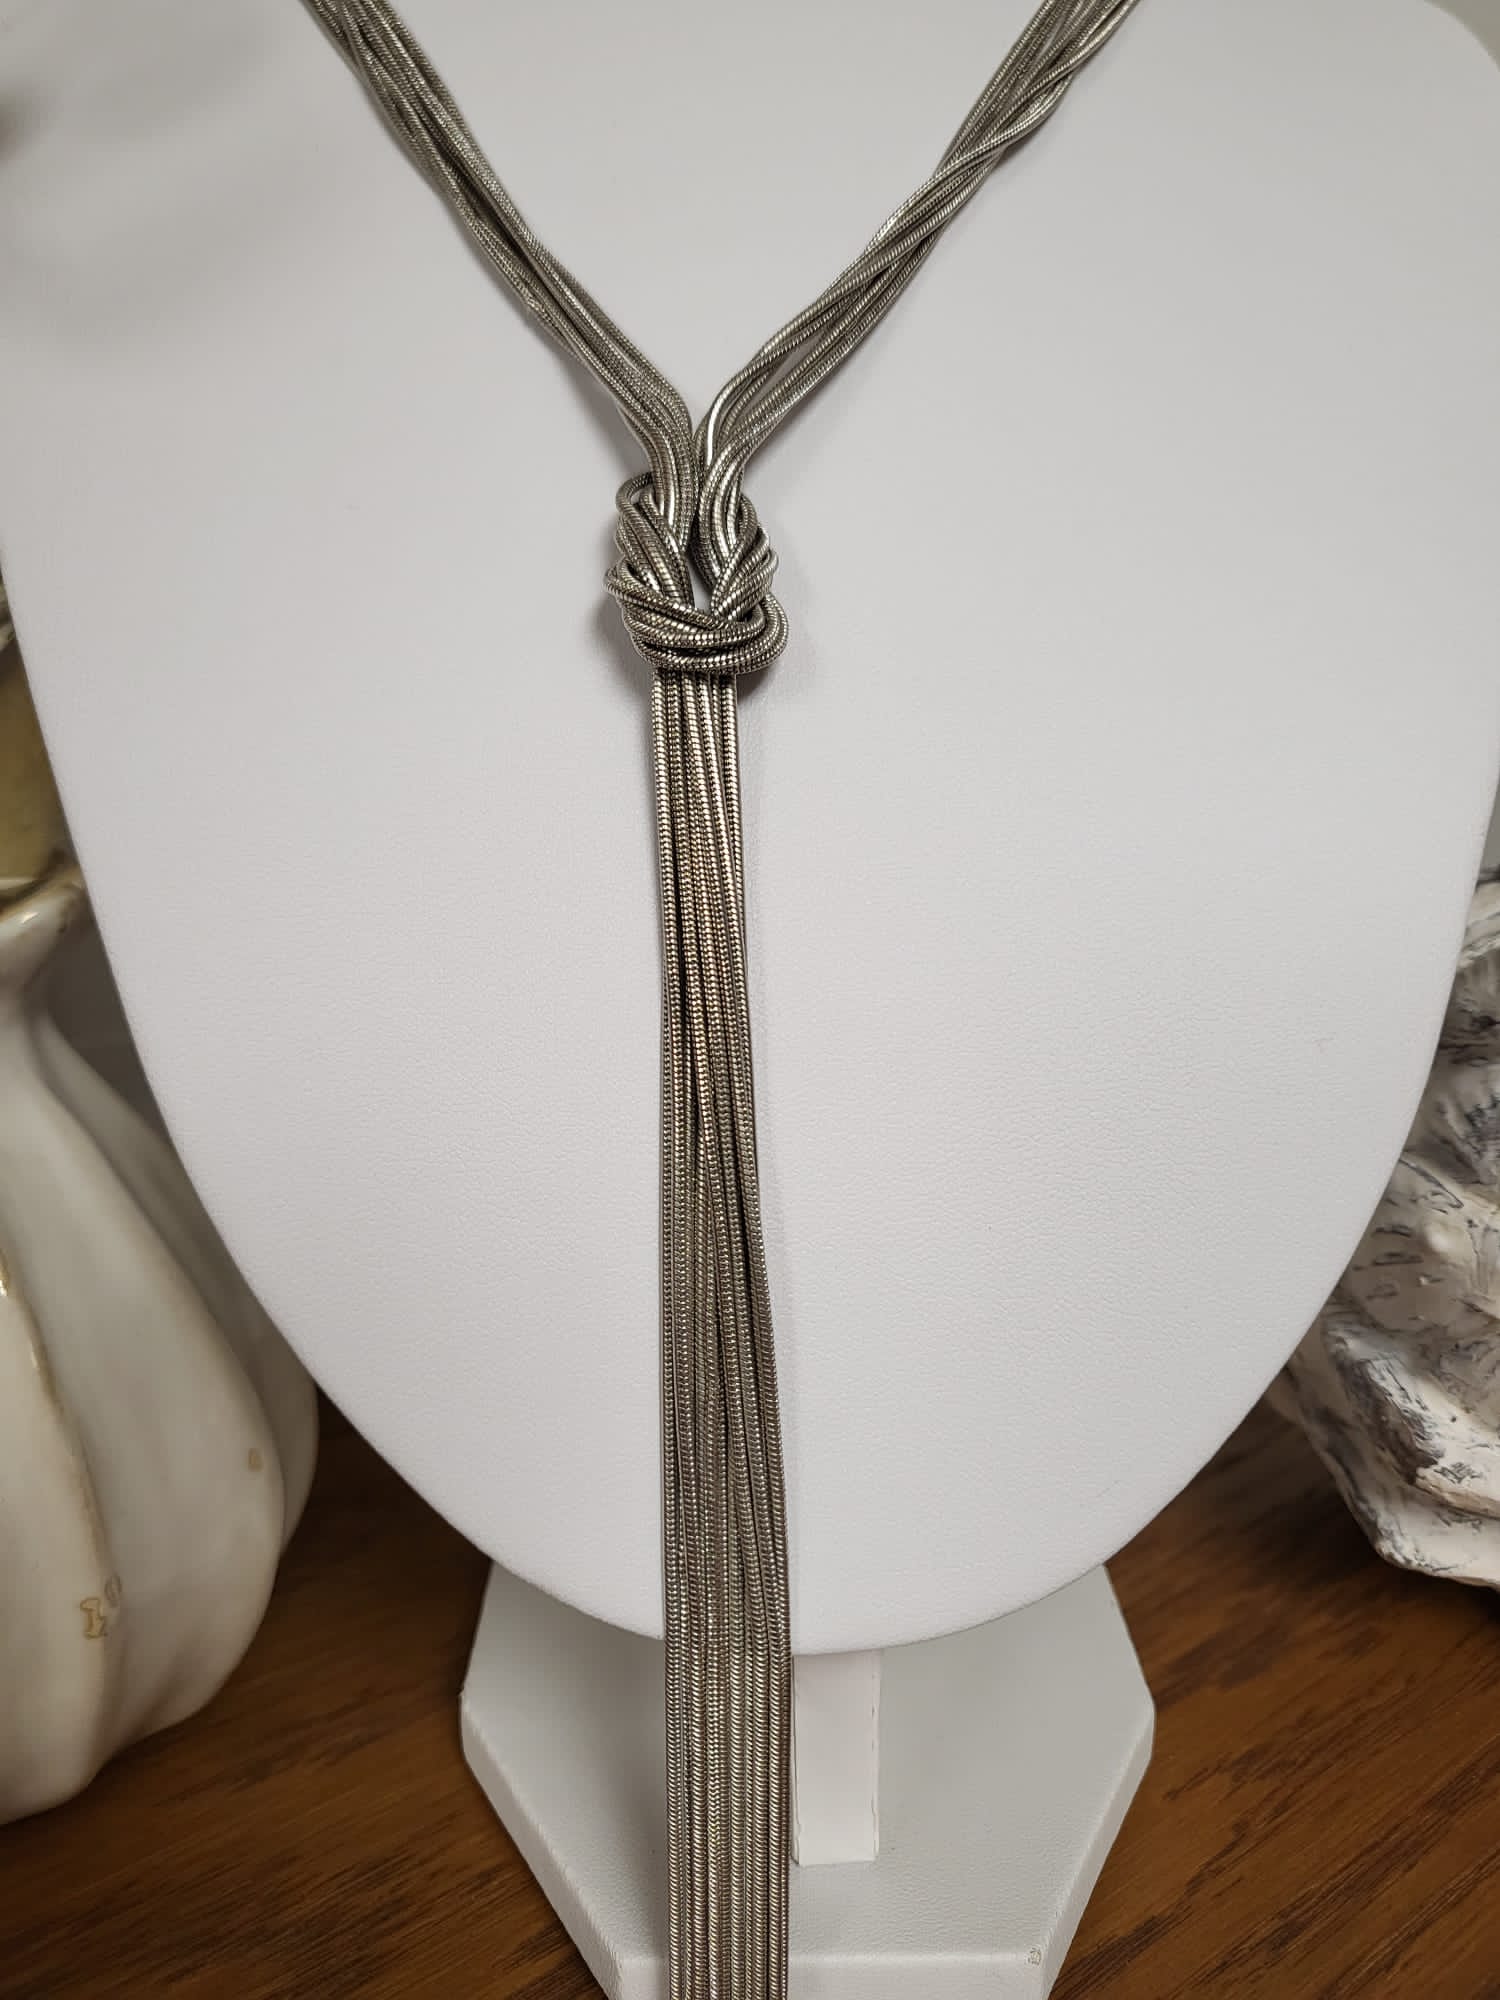 Long plain chain silver necklace with knot